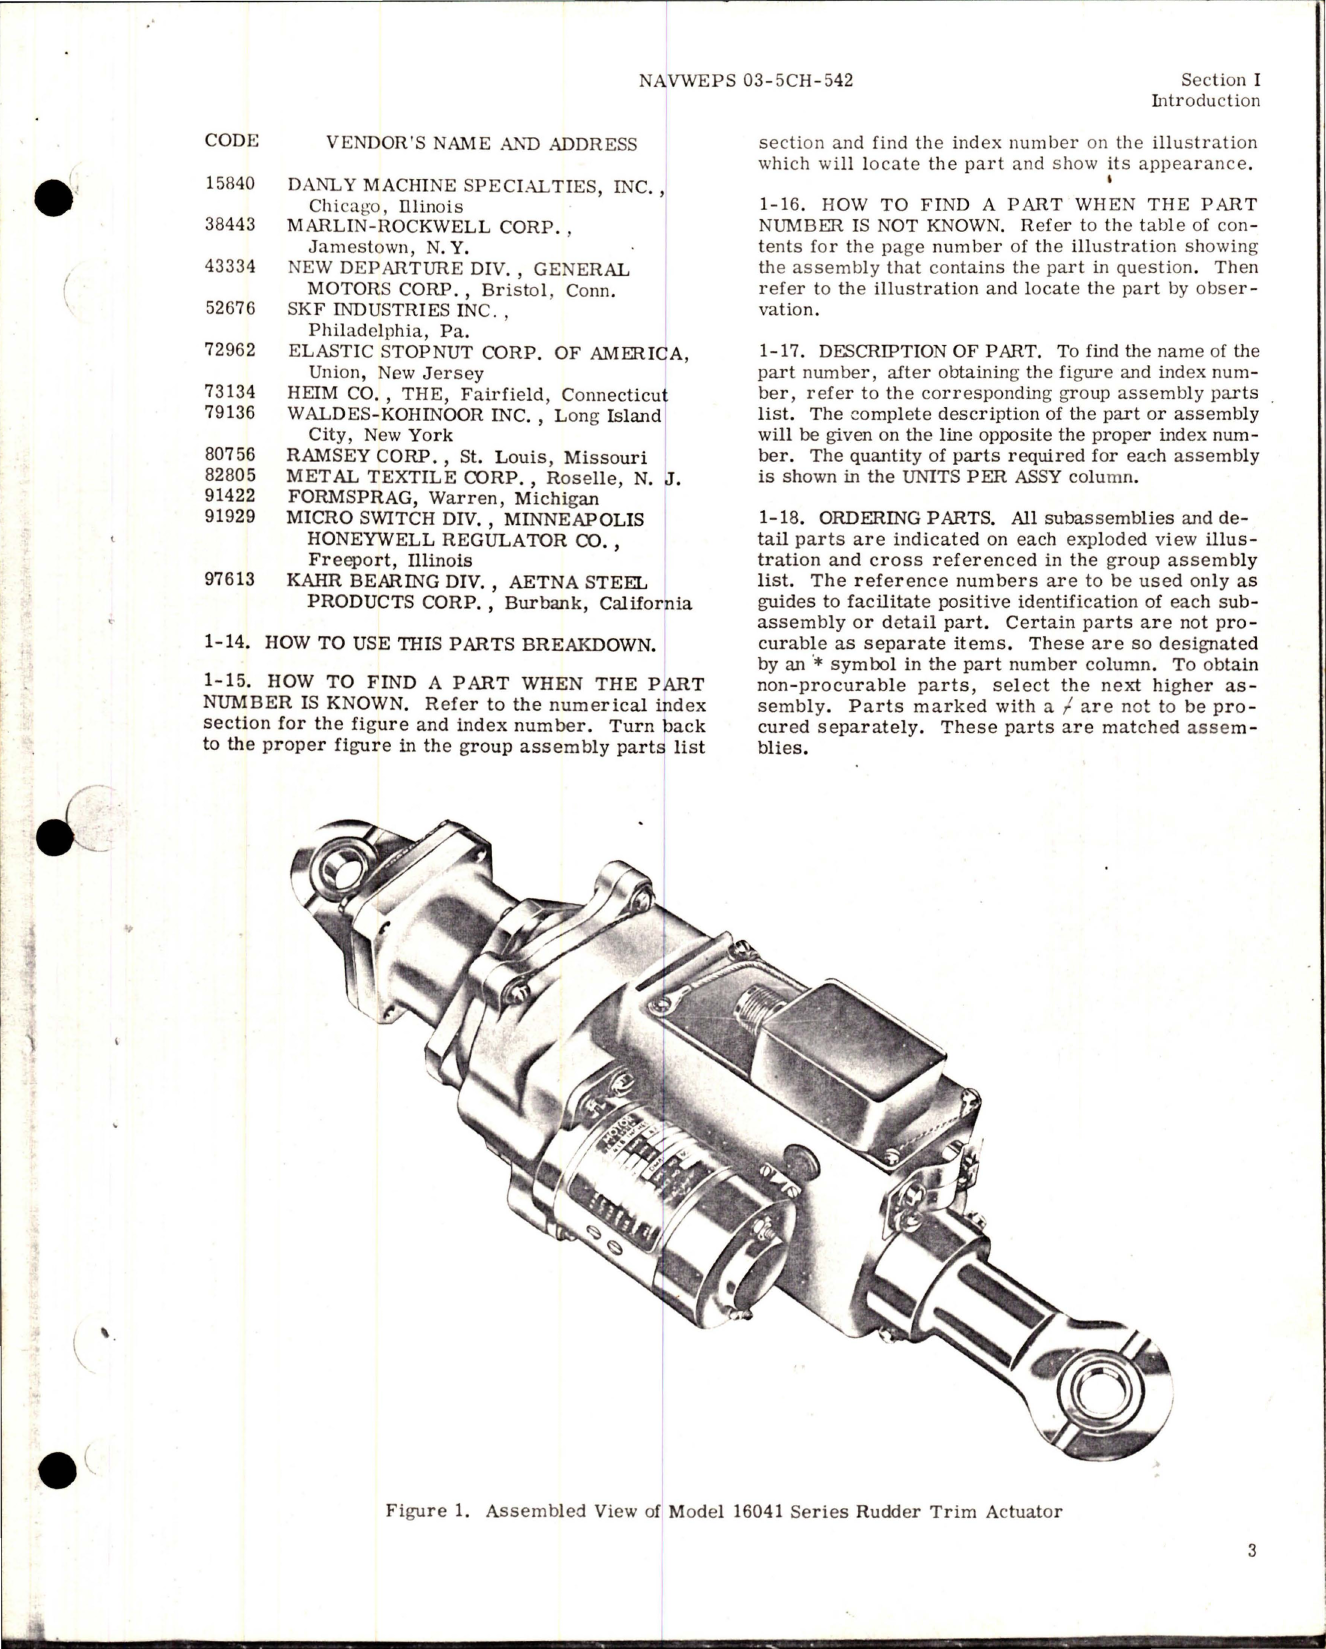 Sample page 7 from AirCorps Library document: Illustrated Parts Breakdown for Rudder Trim Actuator